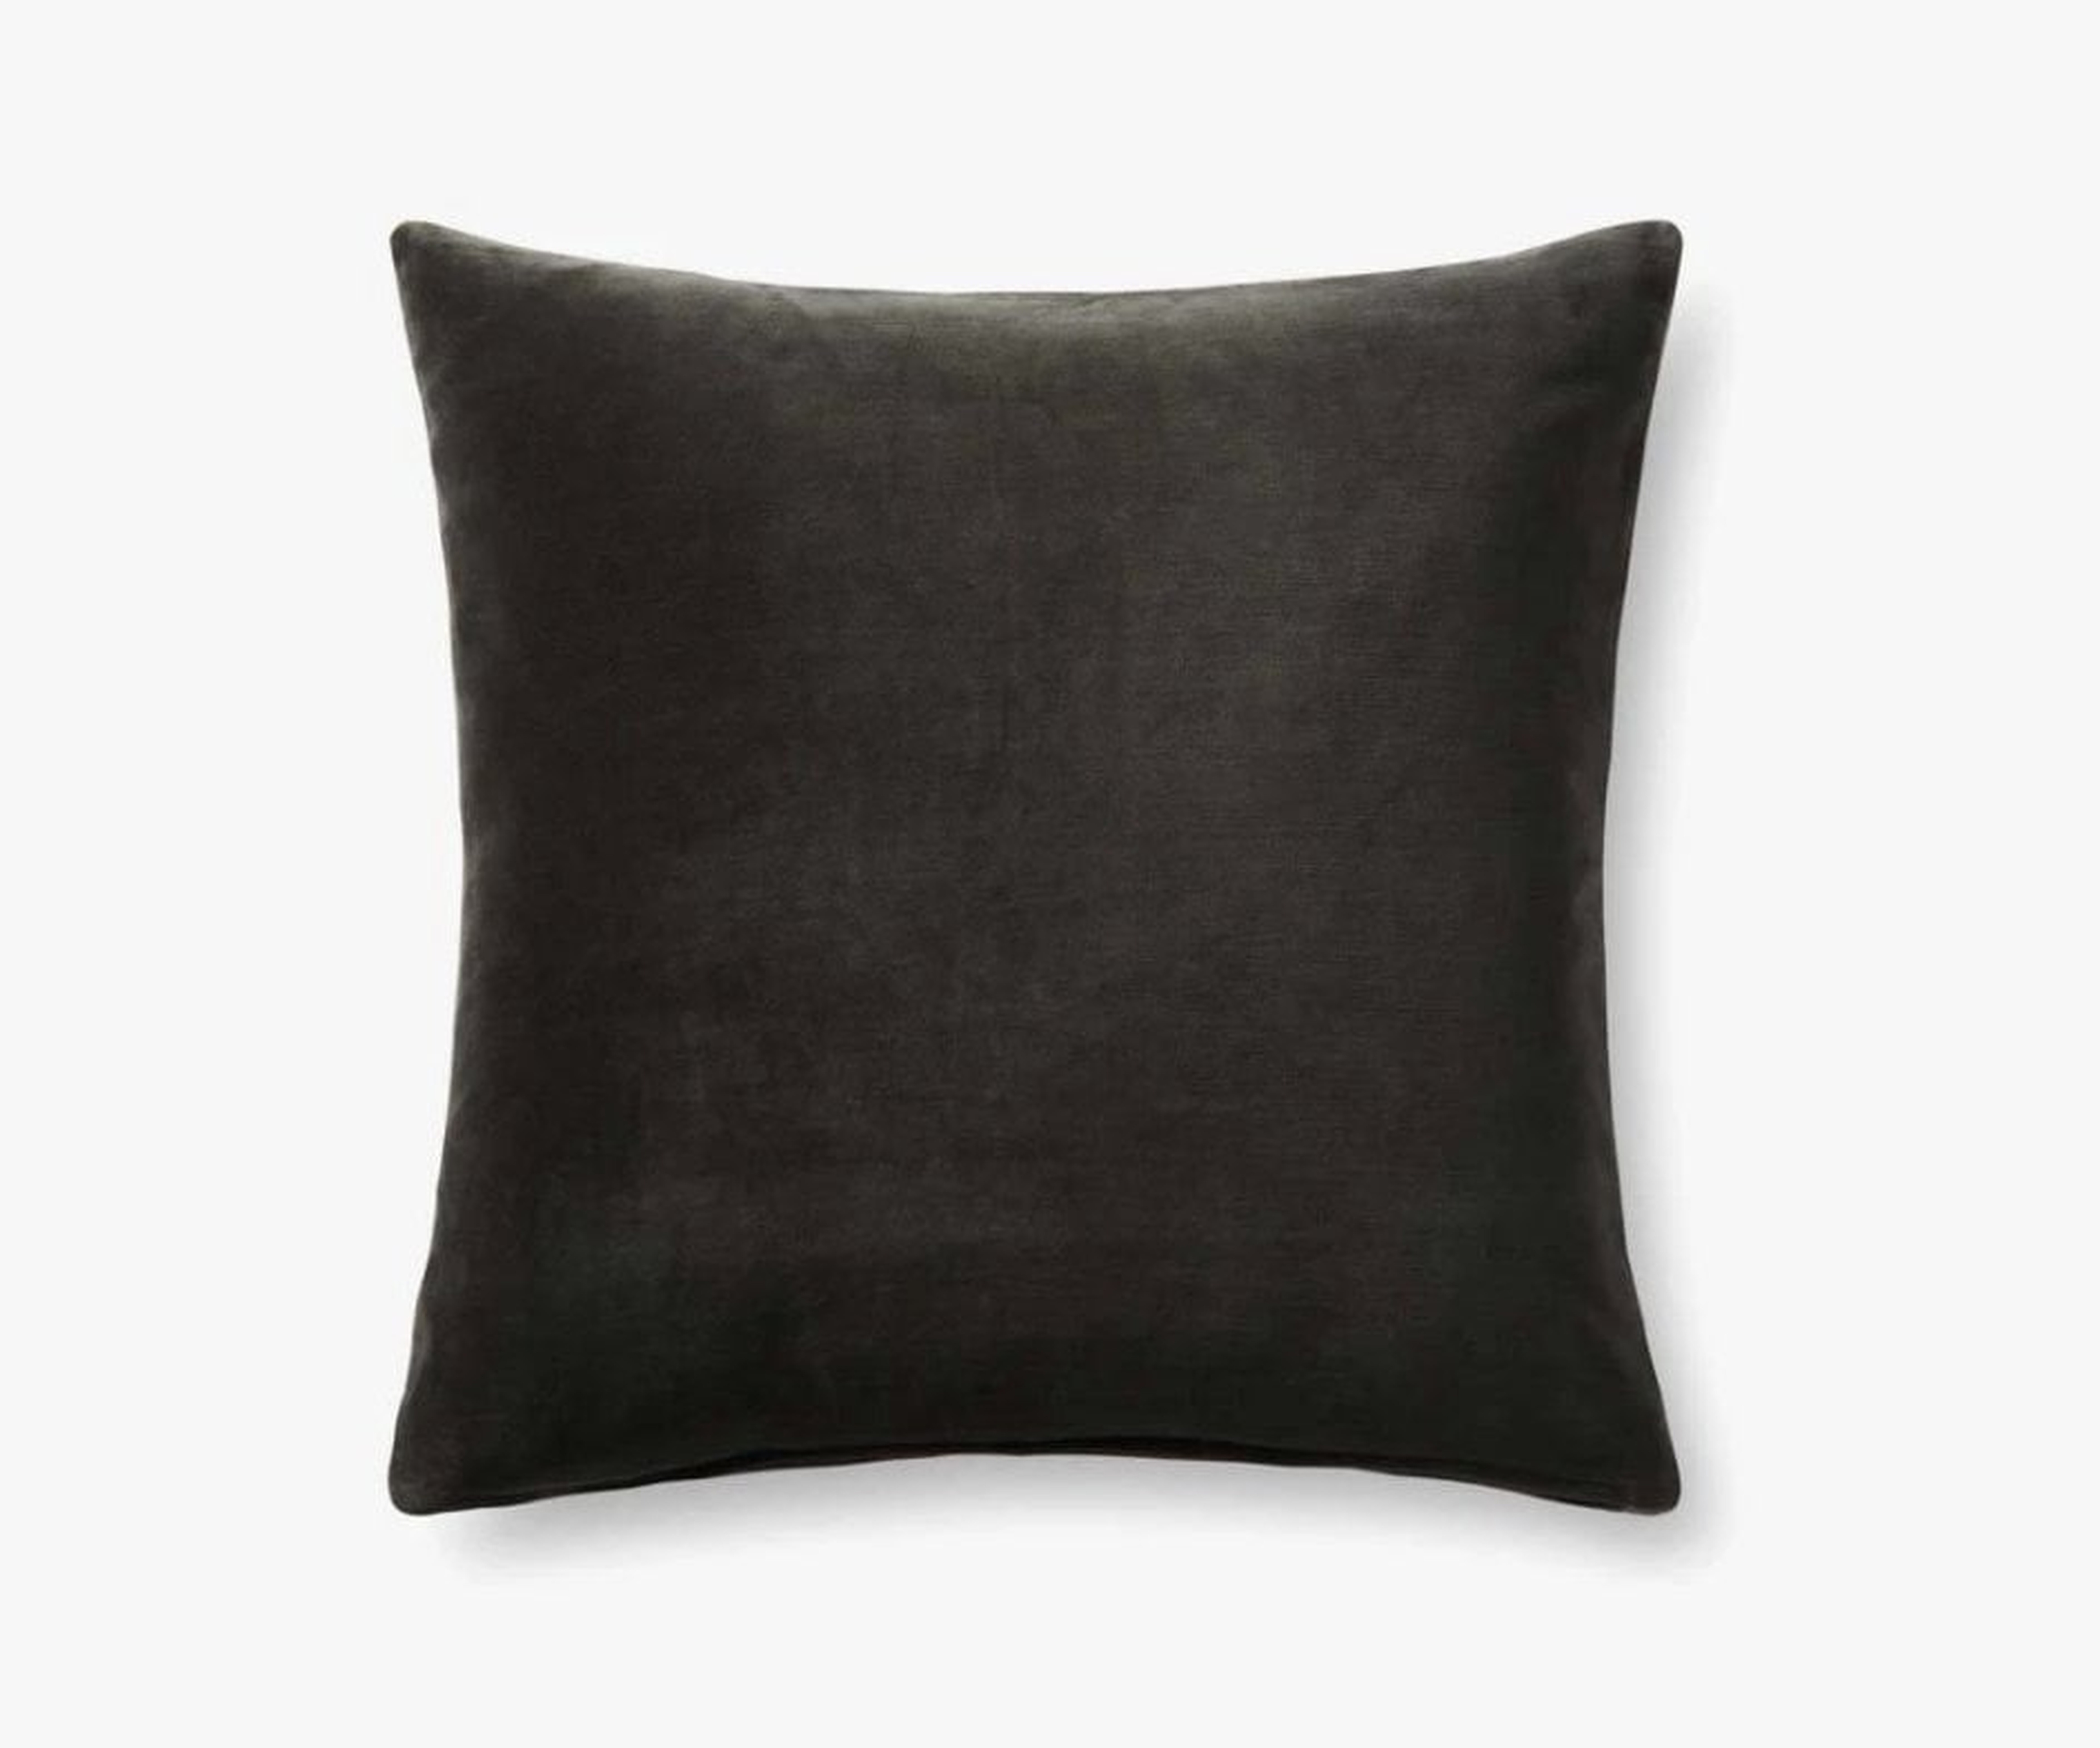 Loloi PILLOWS P0737 Charcoal / Grey 22" x 22" Cover w/Down - Loloi Rugs